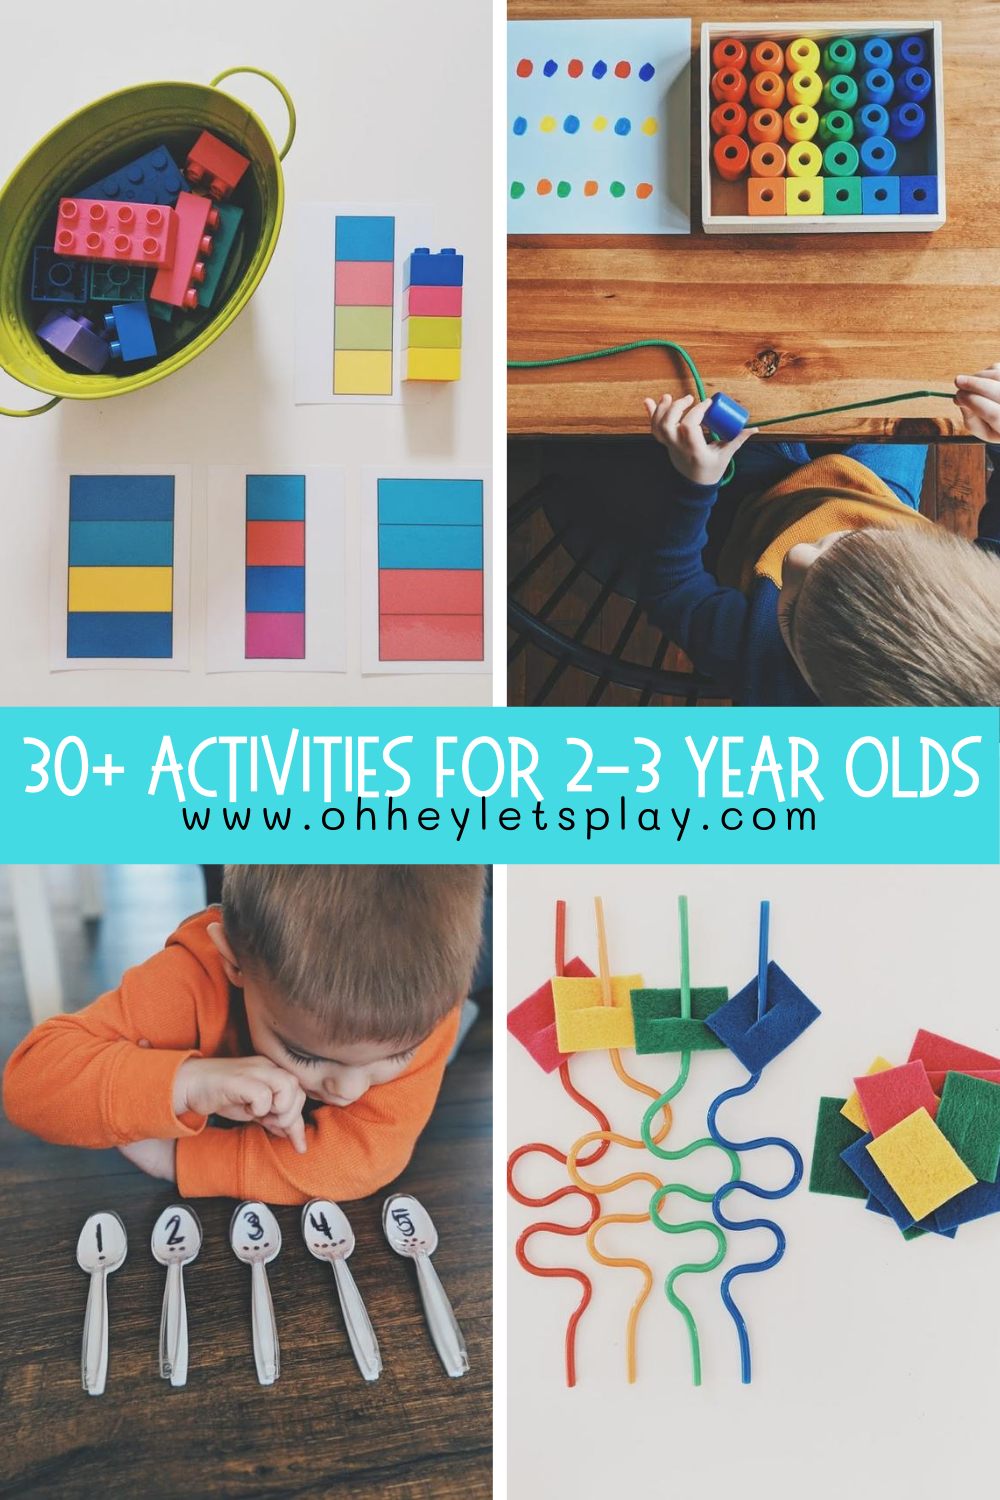 Activities for 2-3 Year Olds